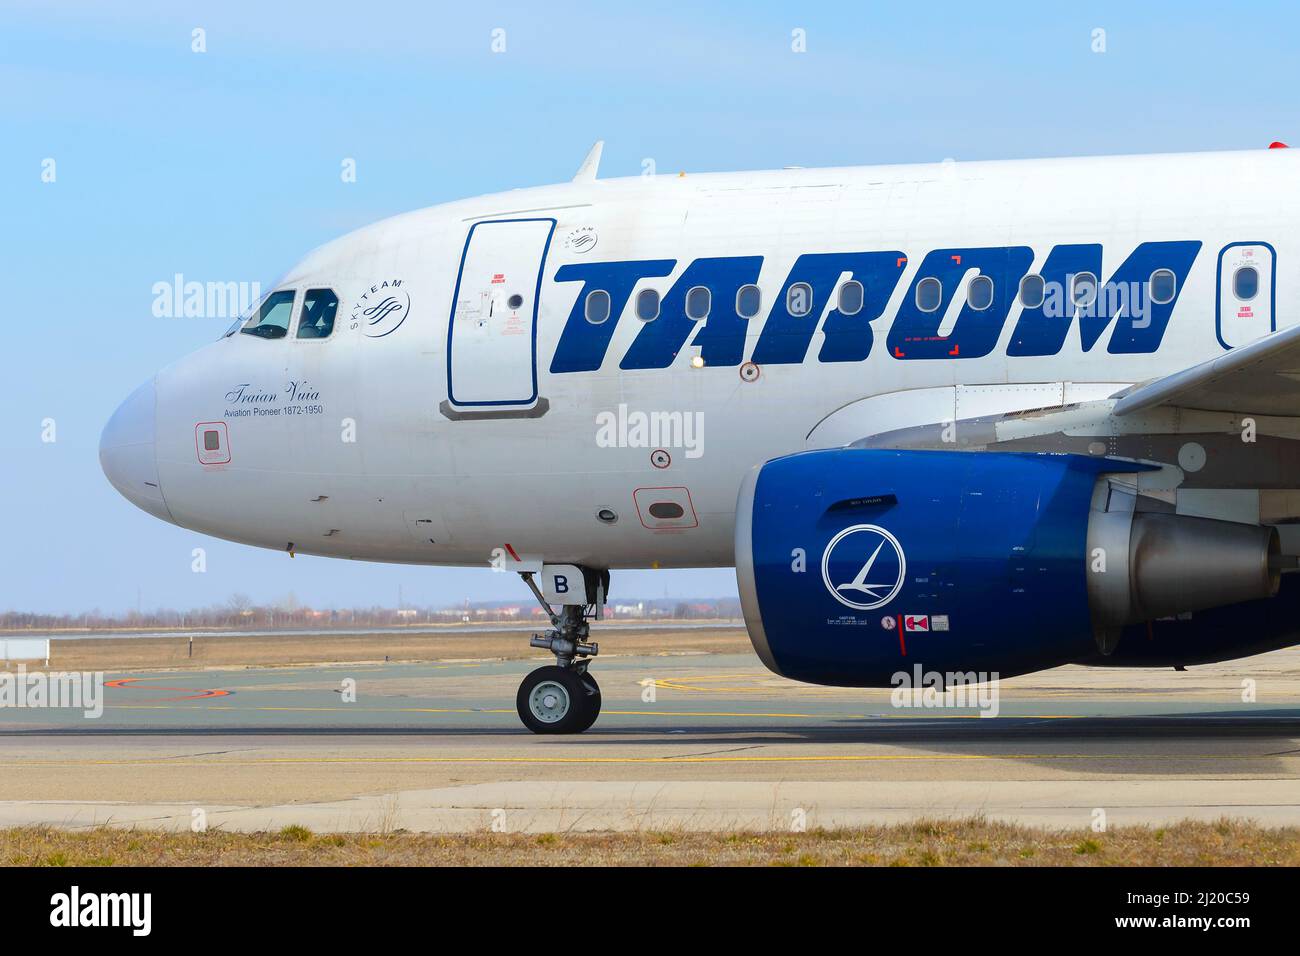 TAROM Airbus A318 aircraft at Bucharest Airport. Airplane of Romanian Air Transport. A318-100 plane equipped with engine CFM56. Stock Photo